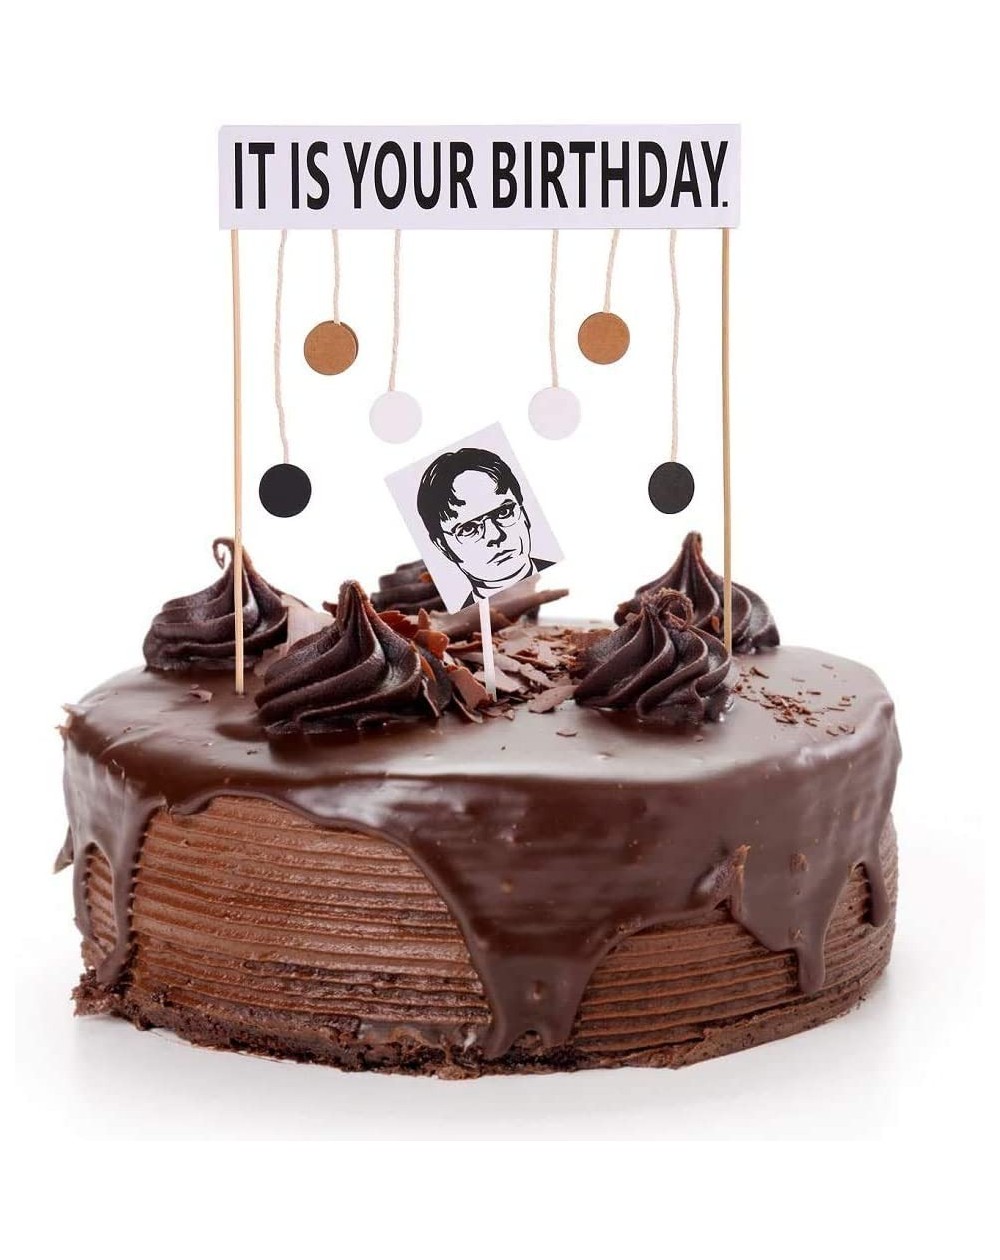 Cake & Cupcake Toppers It Is Your Birthday Cake Topper Office Theme Dwight Schrute Birthday Party Supplies Decorations Gifts ...